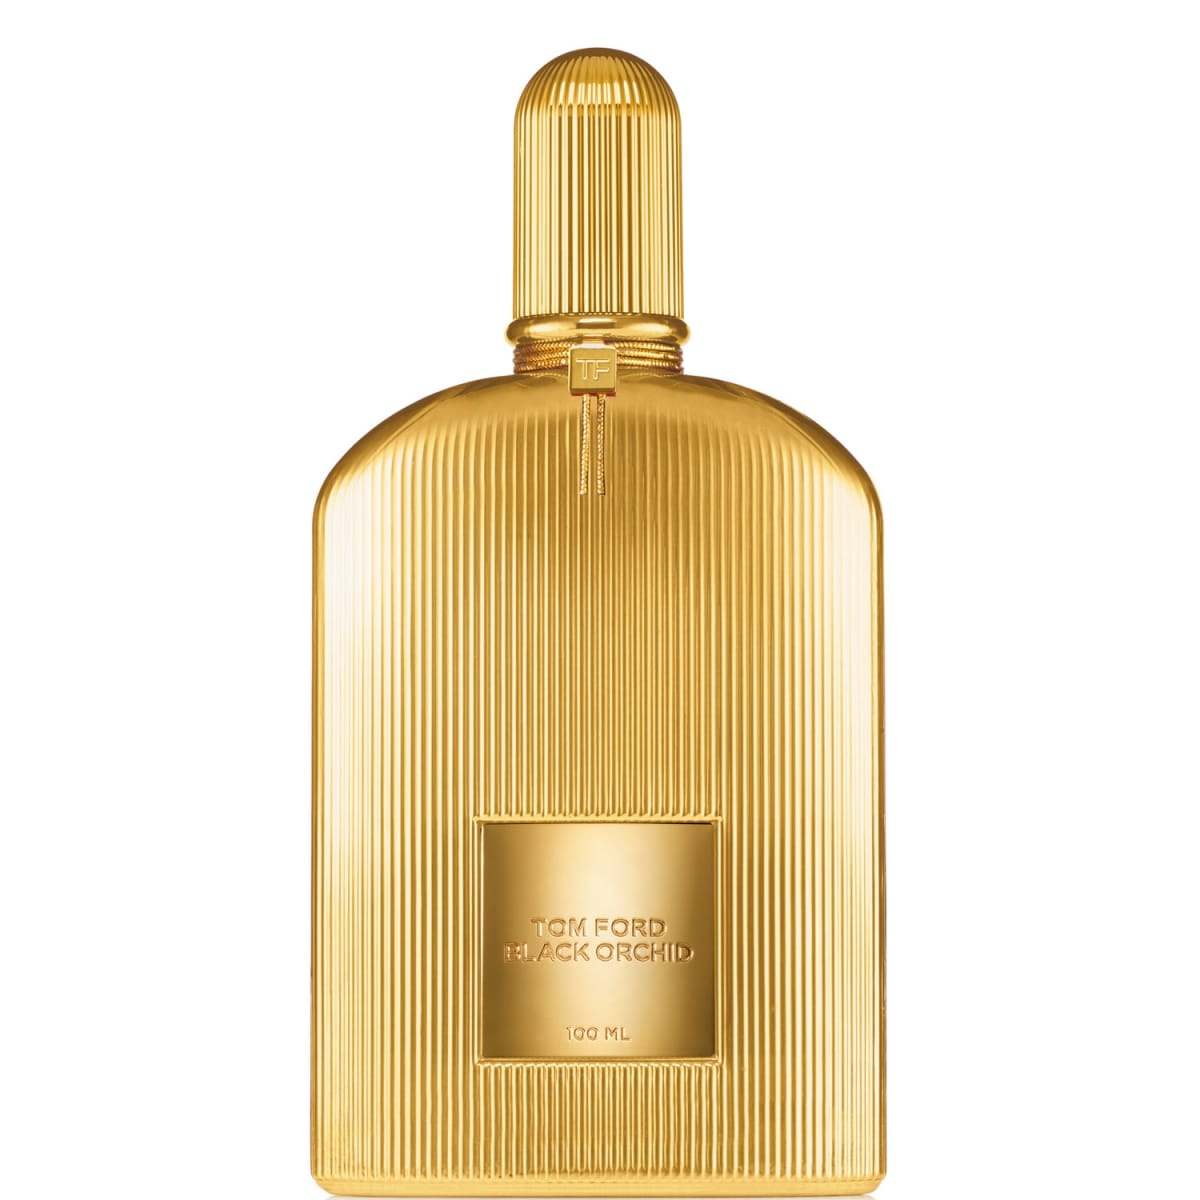 TOM FORD BLACK ORCHID GOLD CAPSULE EDP 50ML